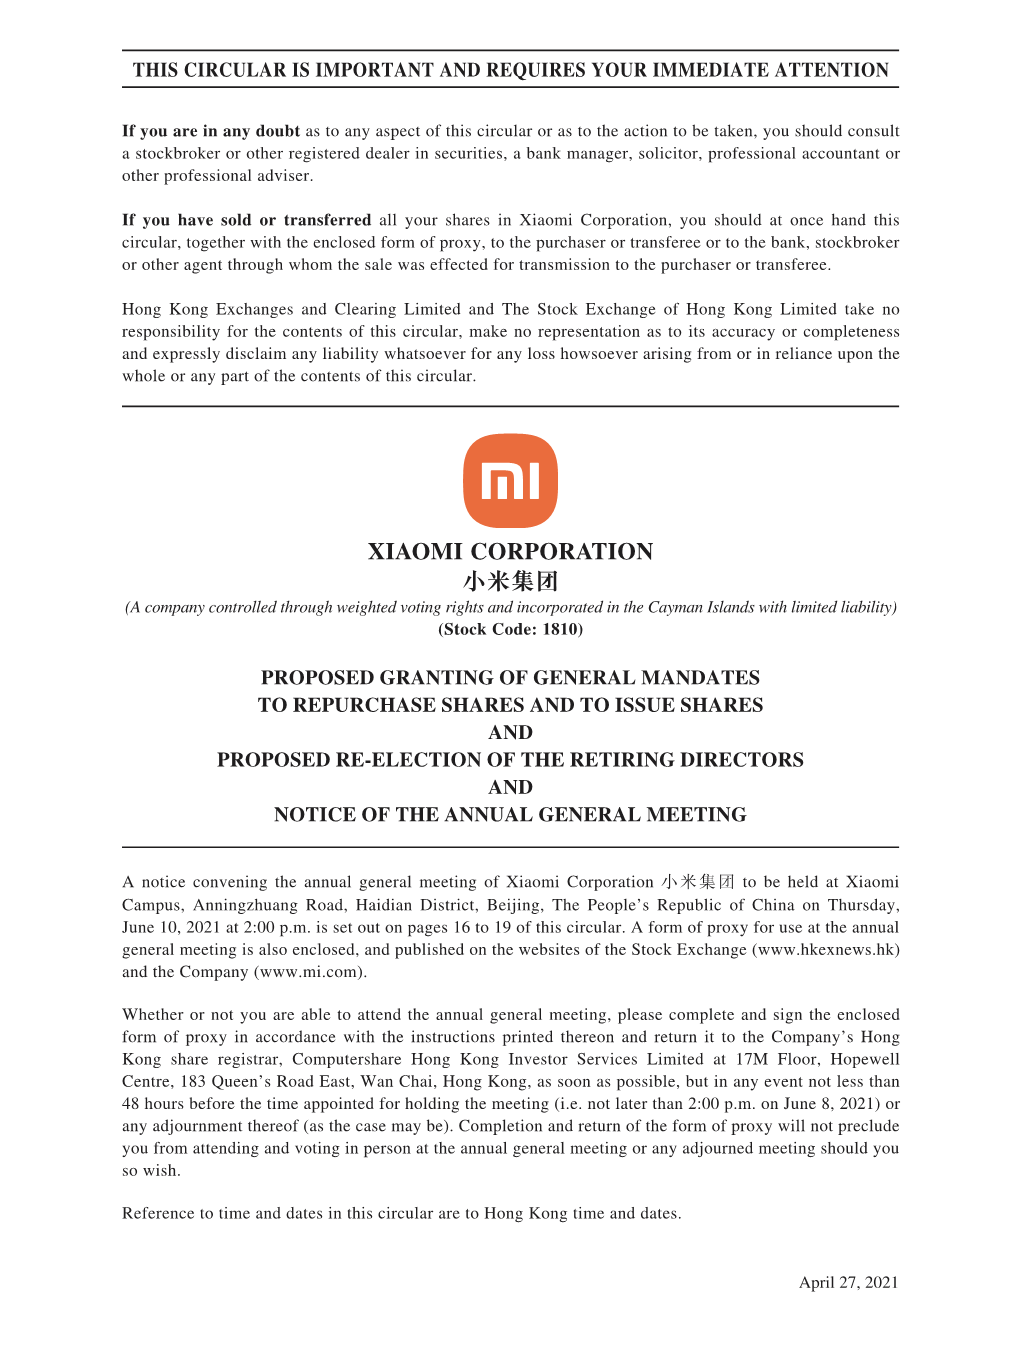 XIAOMI CORPORATION 小米集團 (A Company Controlled Through Weighted Voting Rights and Incorporated in the Cayman Islands with Limited Liability) (Stock Code: 1810)